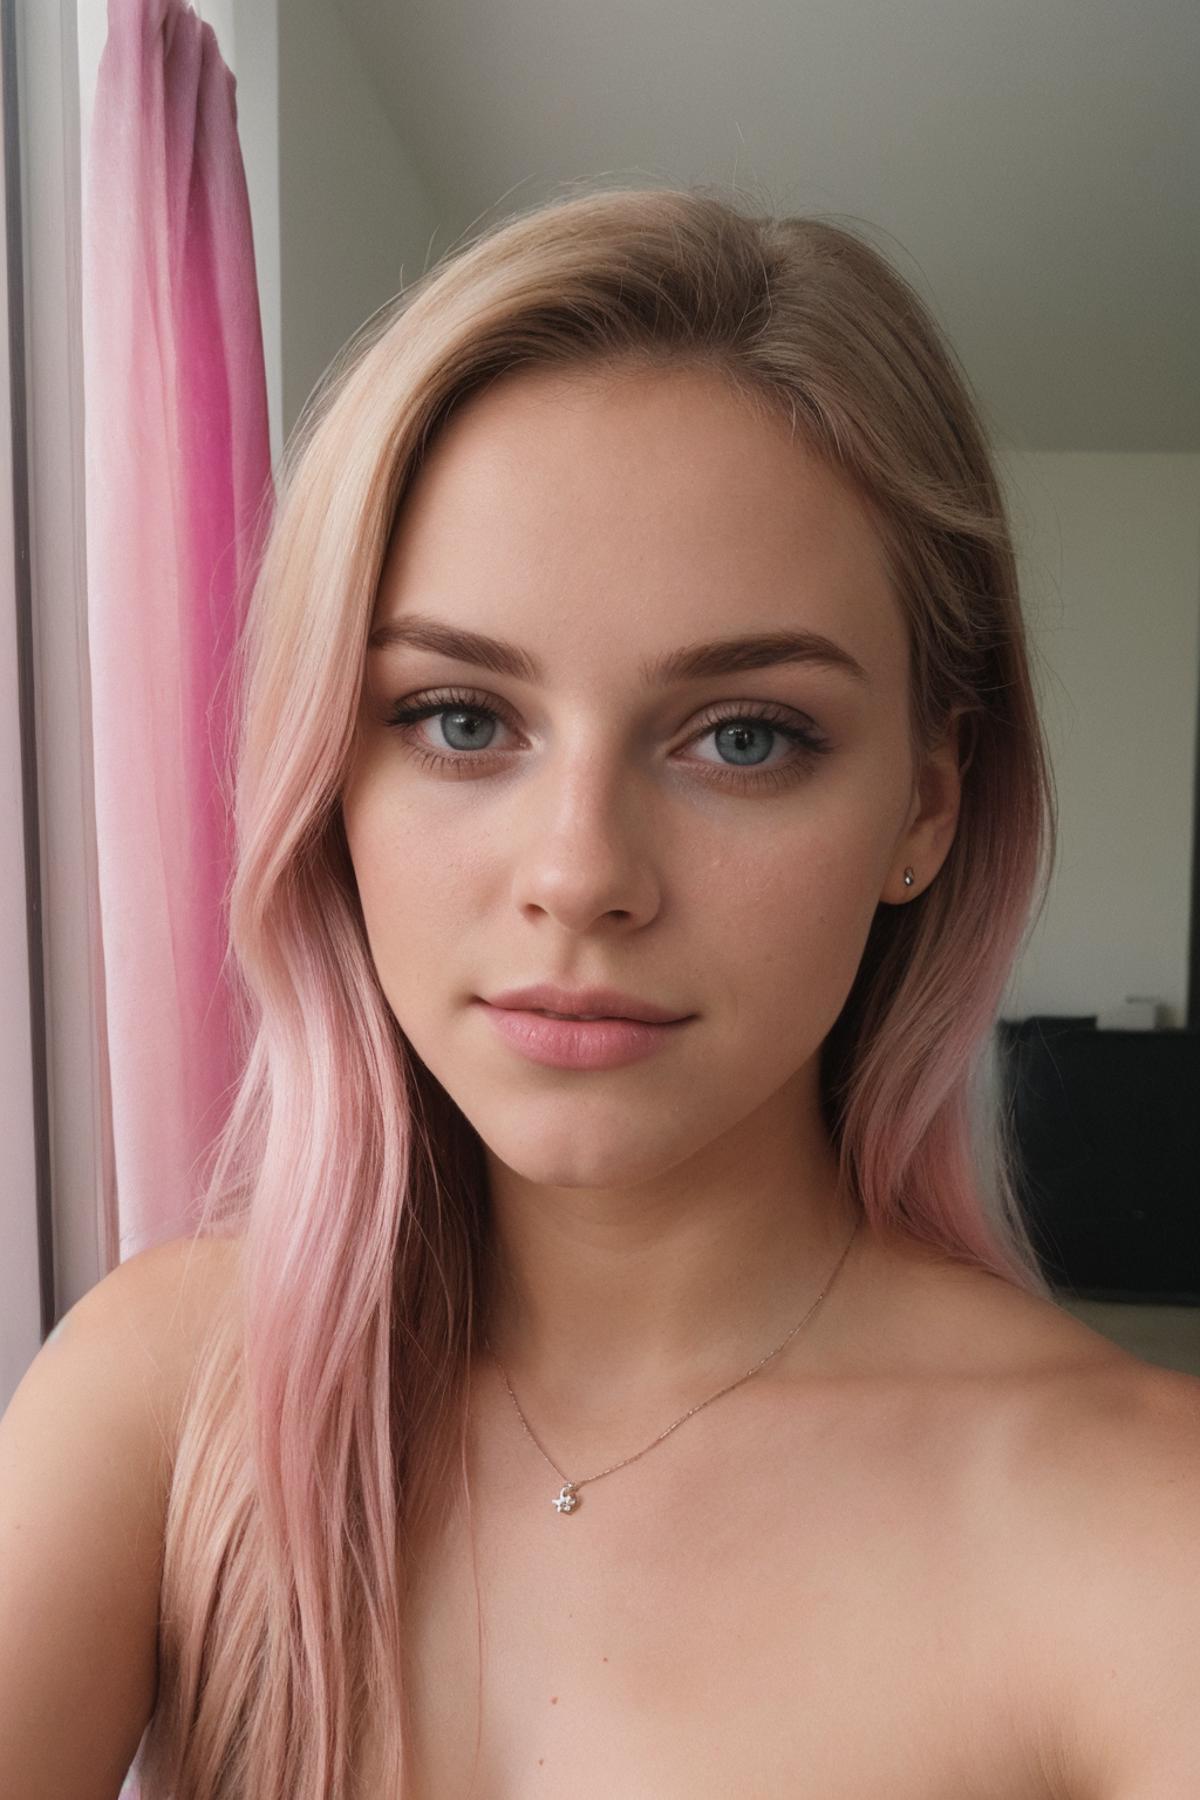 Blonde Woman with Pink Hair and Blue Eyes Looking at the Camera.